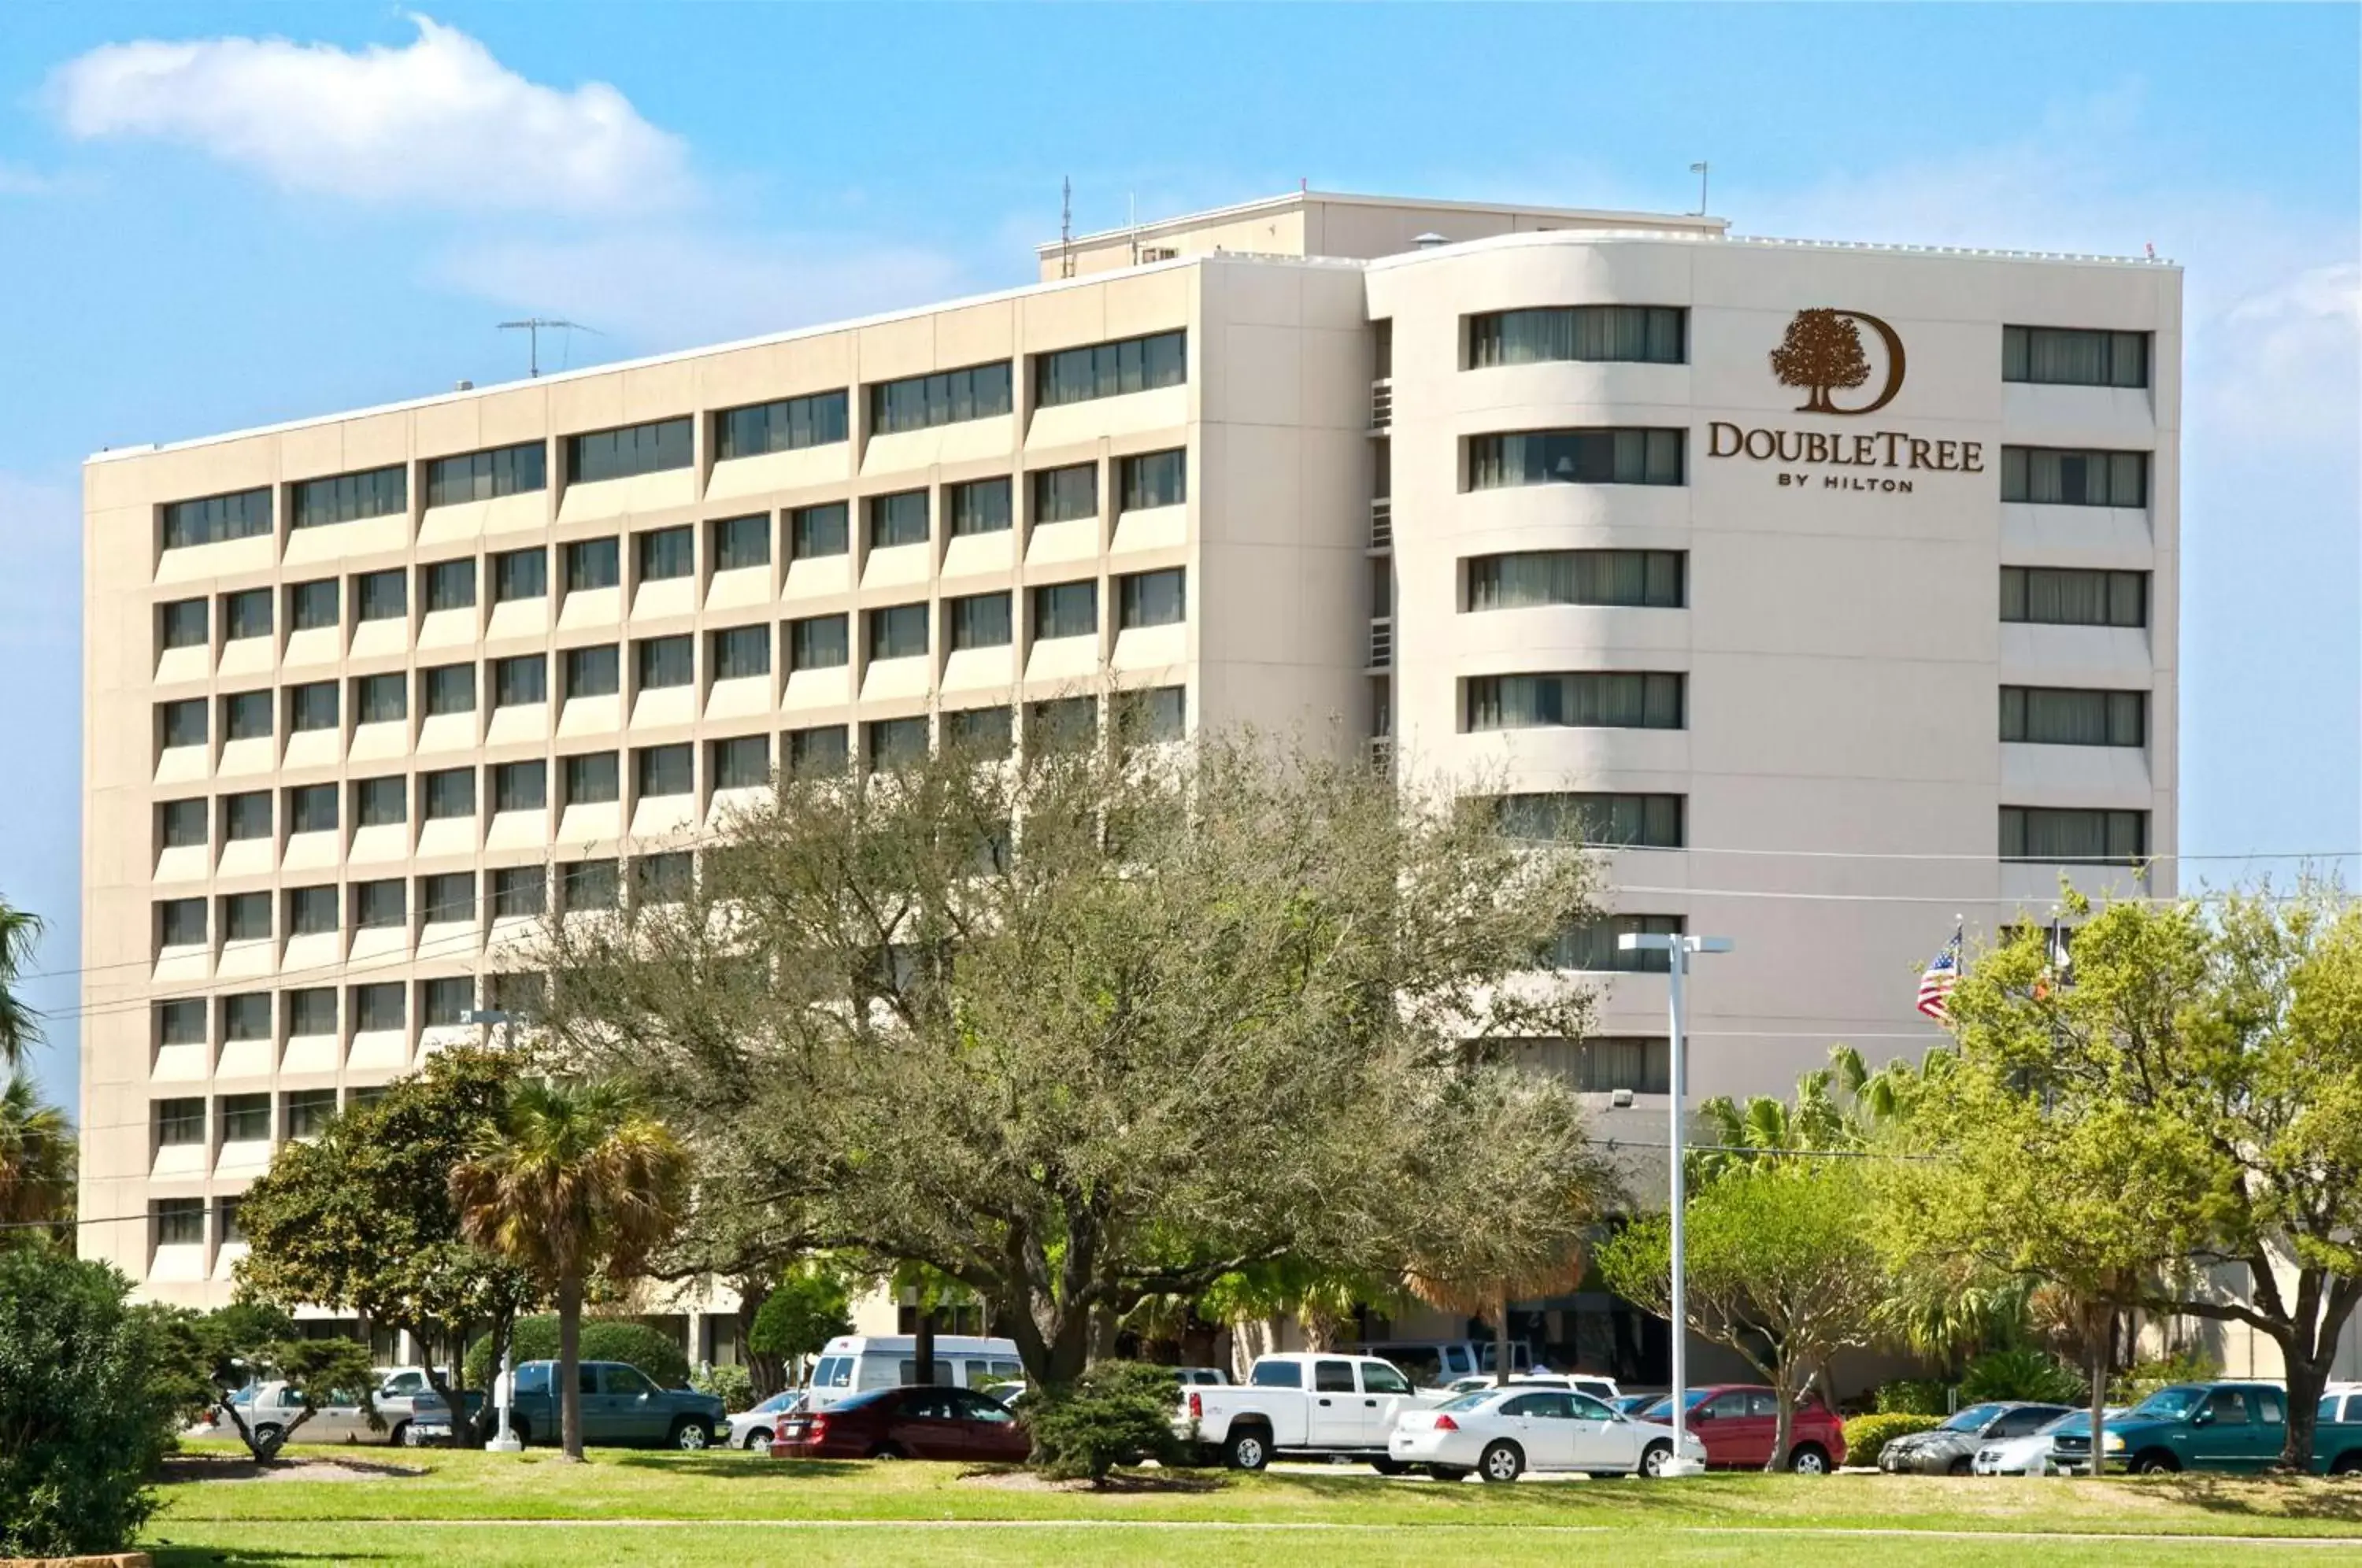 Property Building in DoubleTree by Hilton Hotel Houston Hobby Airport